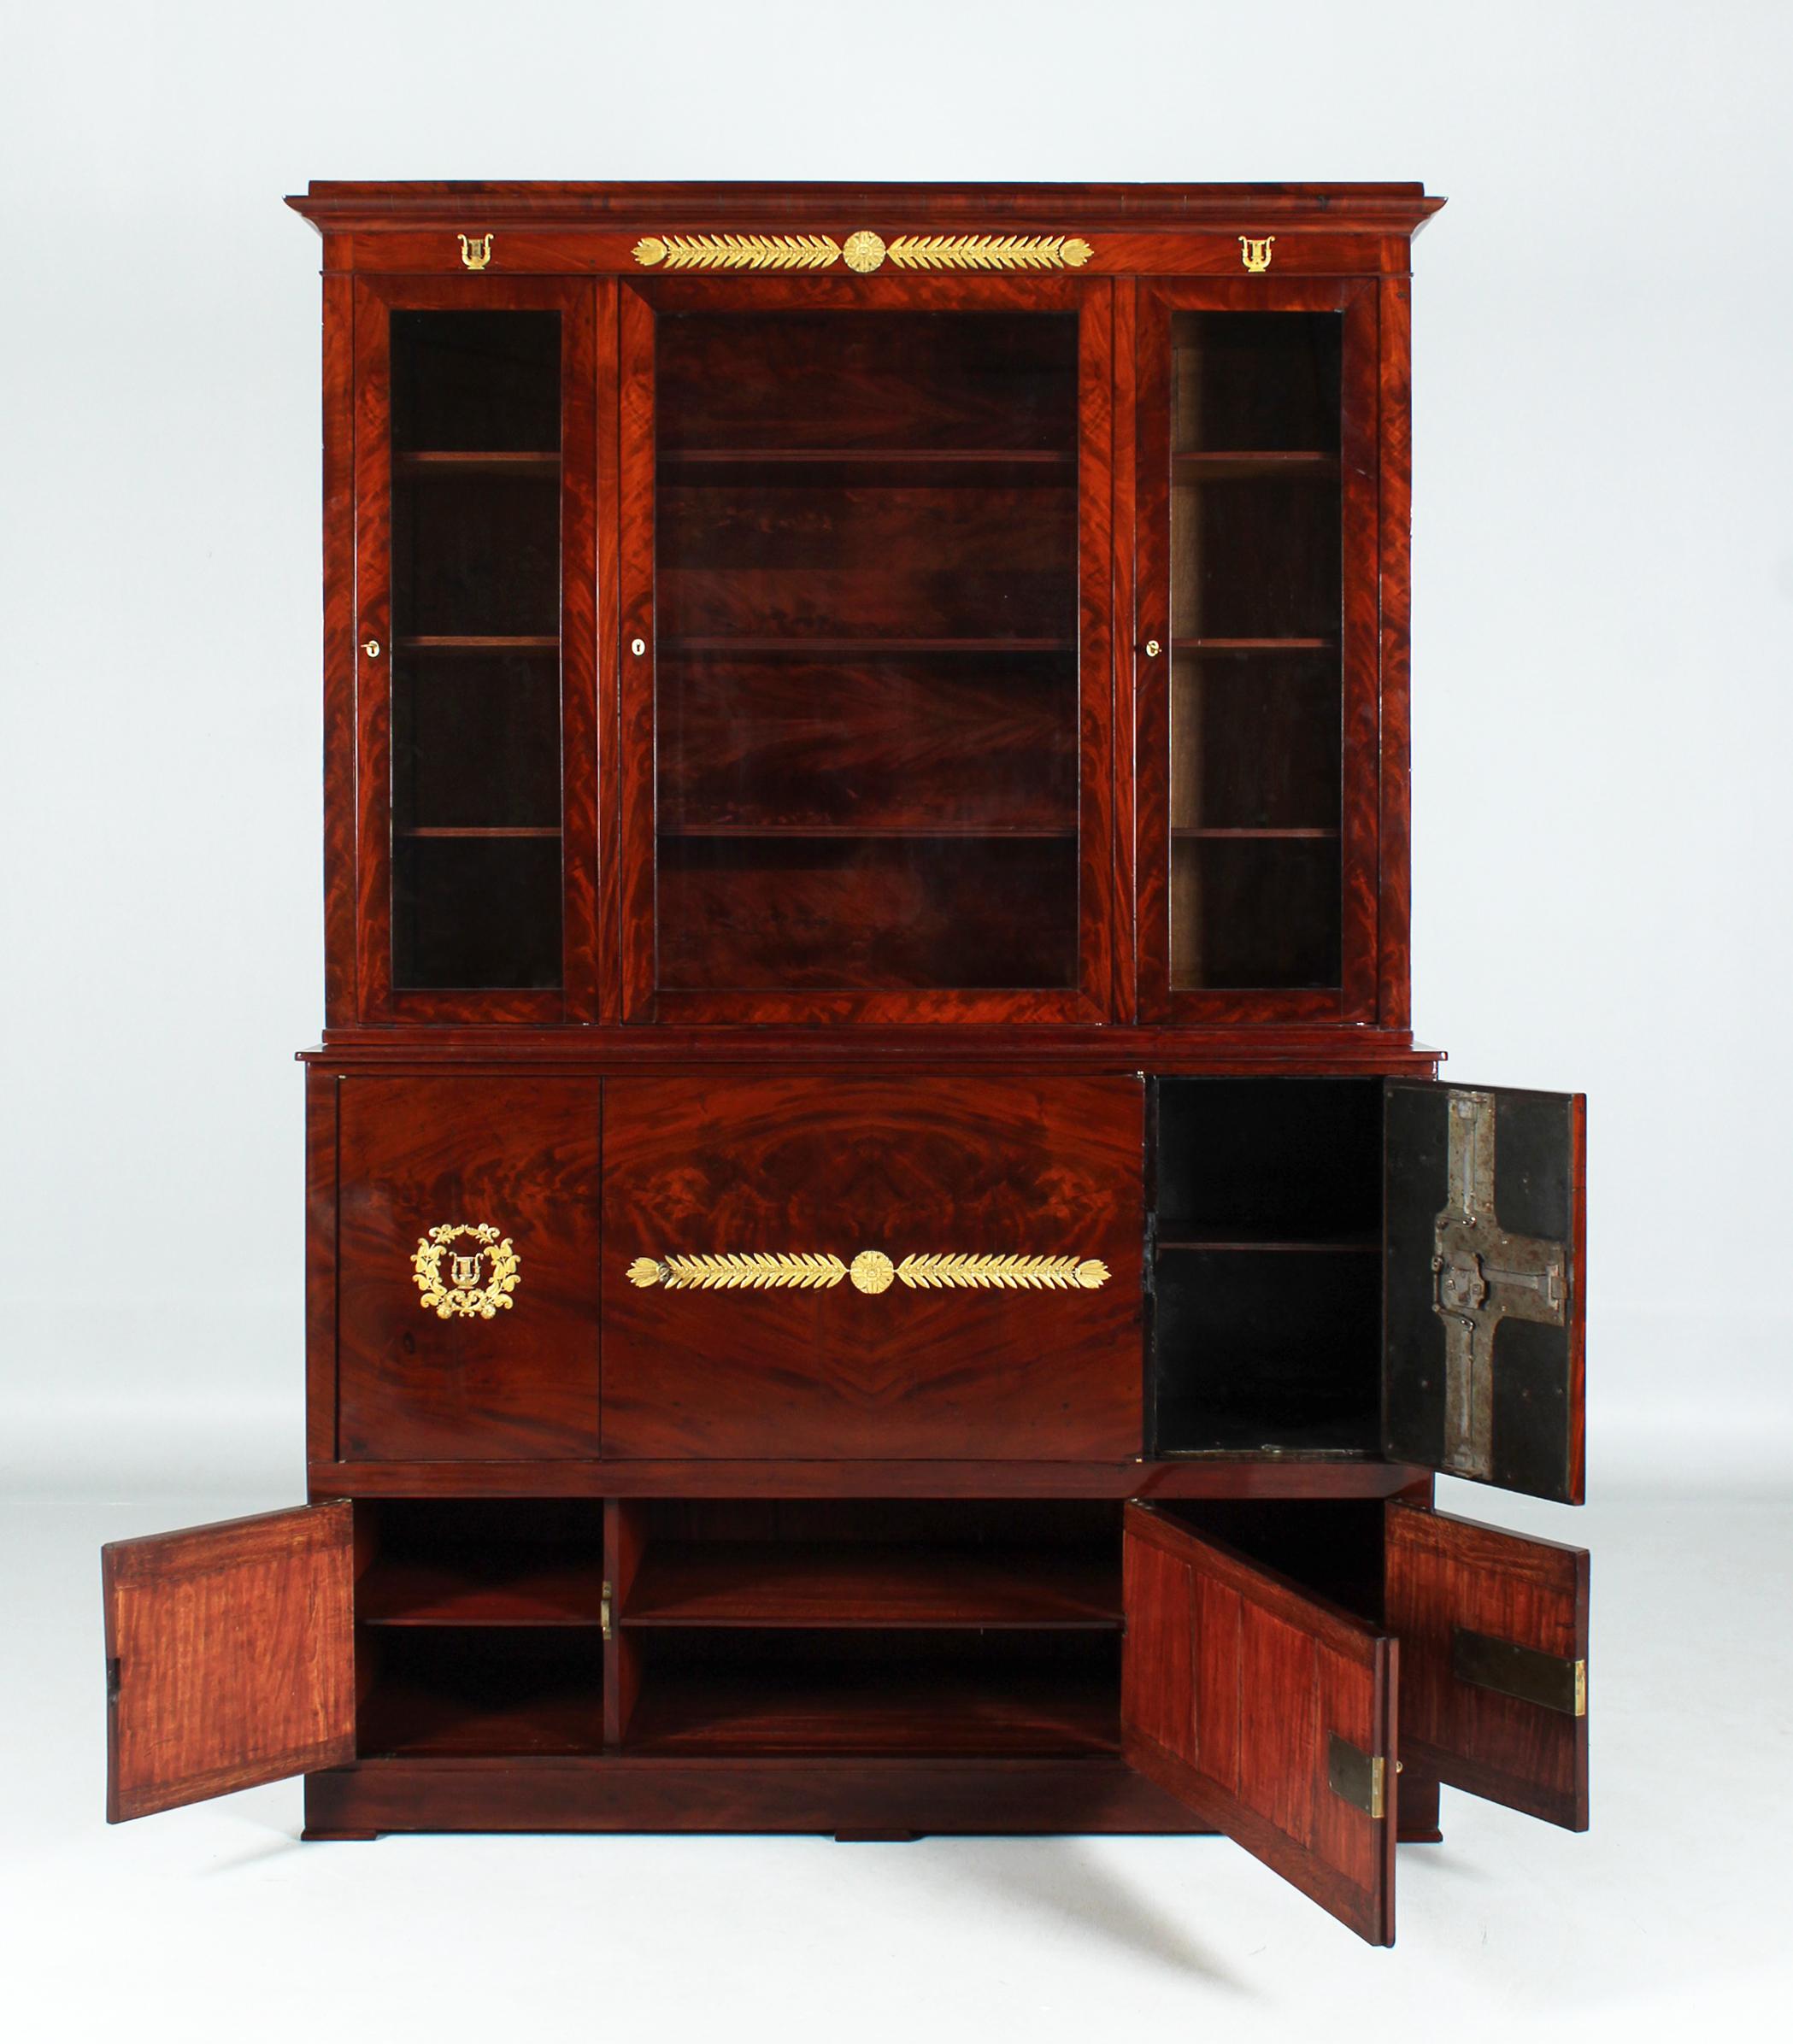 Early 19th Century French Empire Bookcase with Safe-Deposit-Box, Mahogany In Good Condition For Sale In Greven, DE